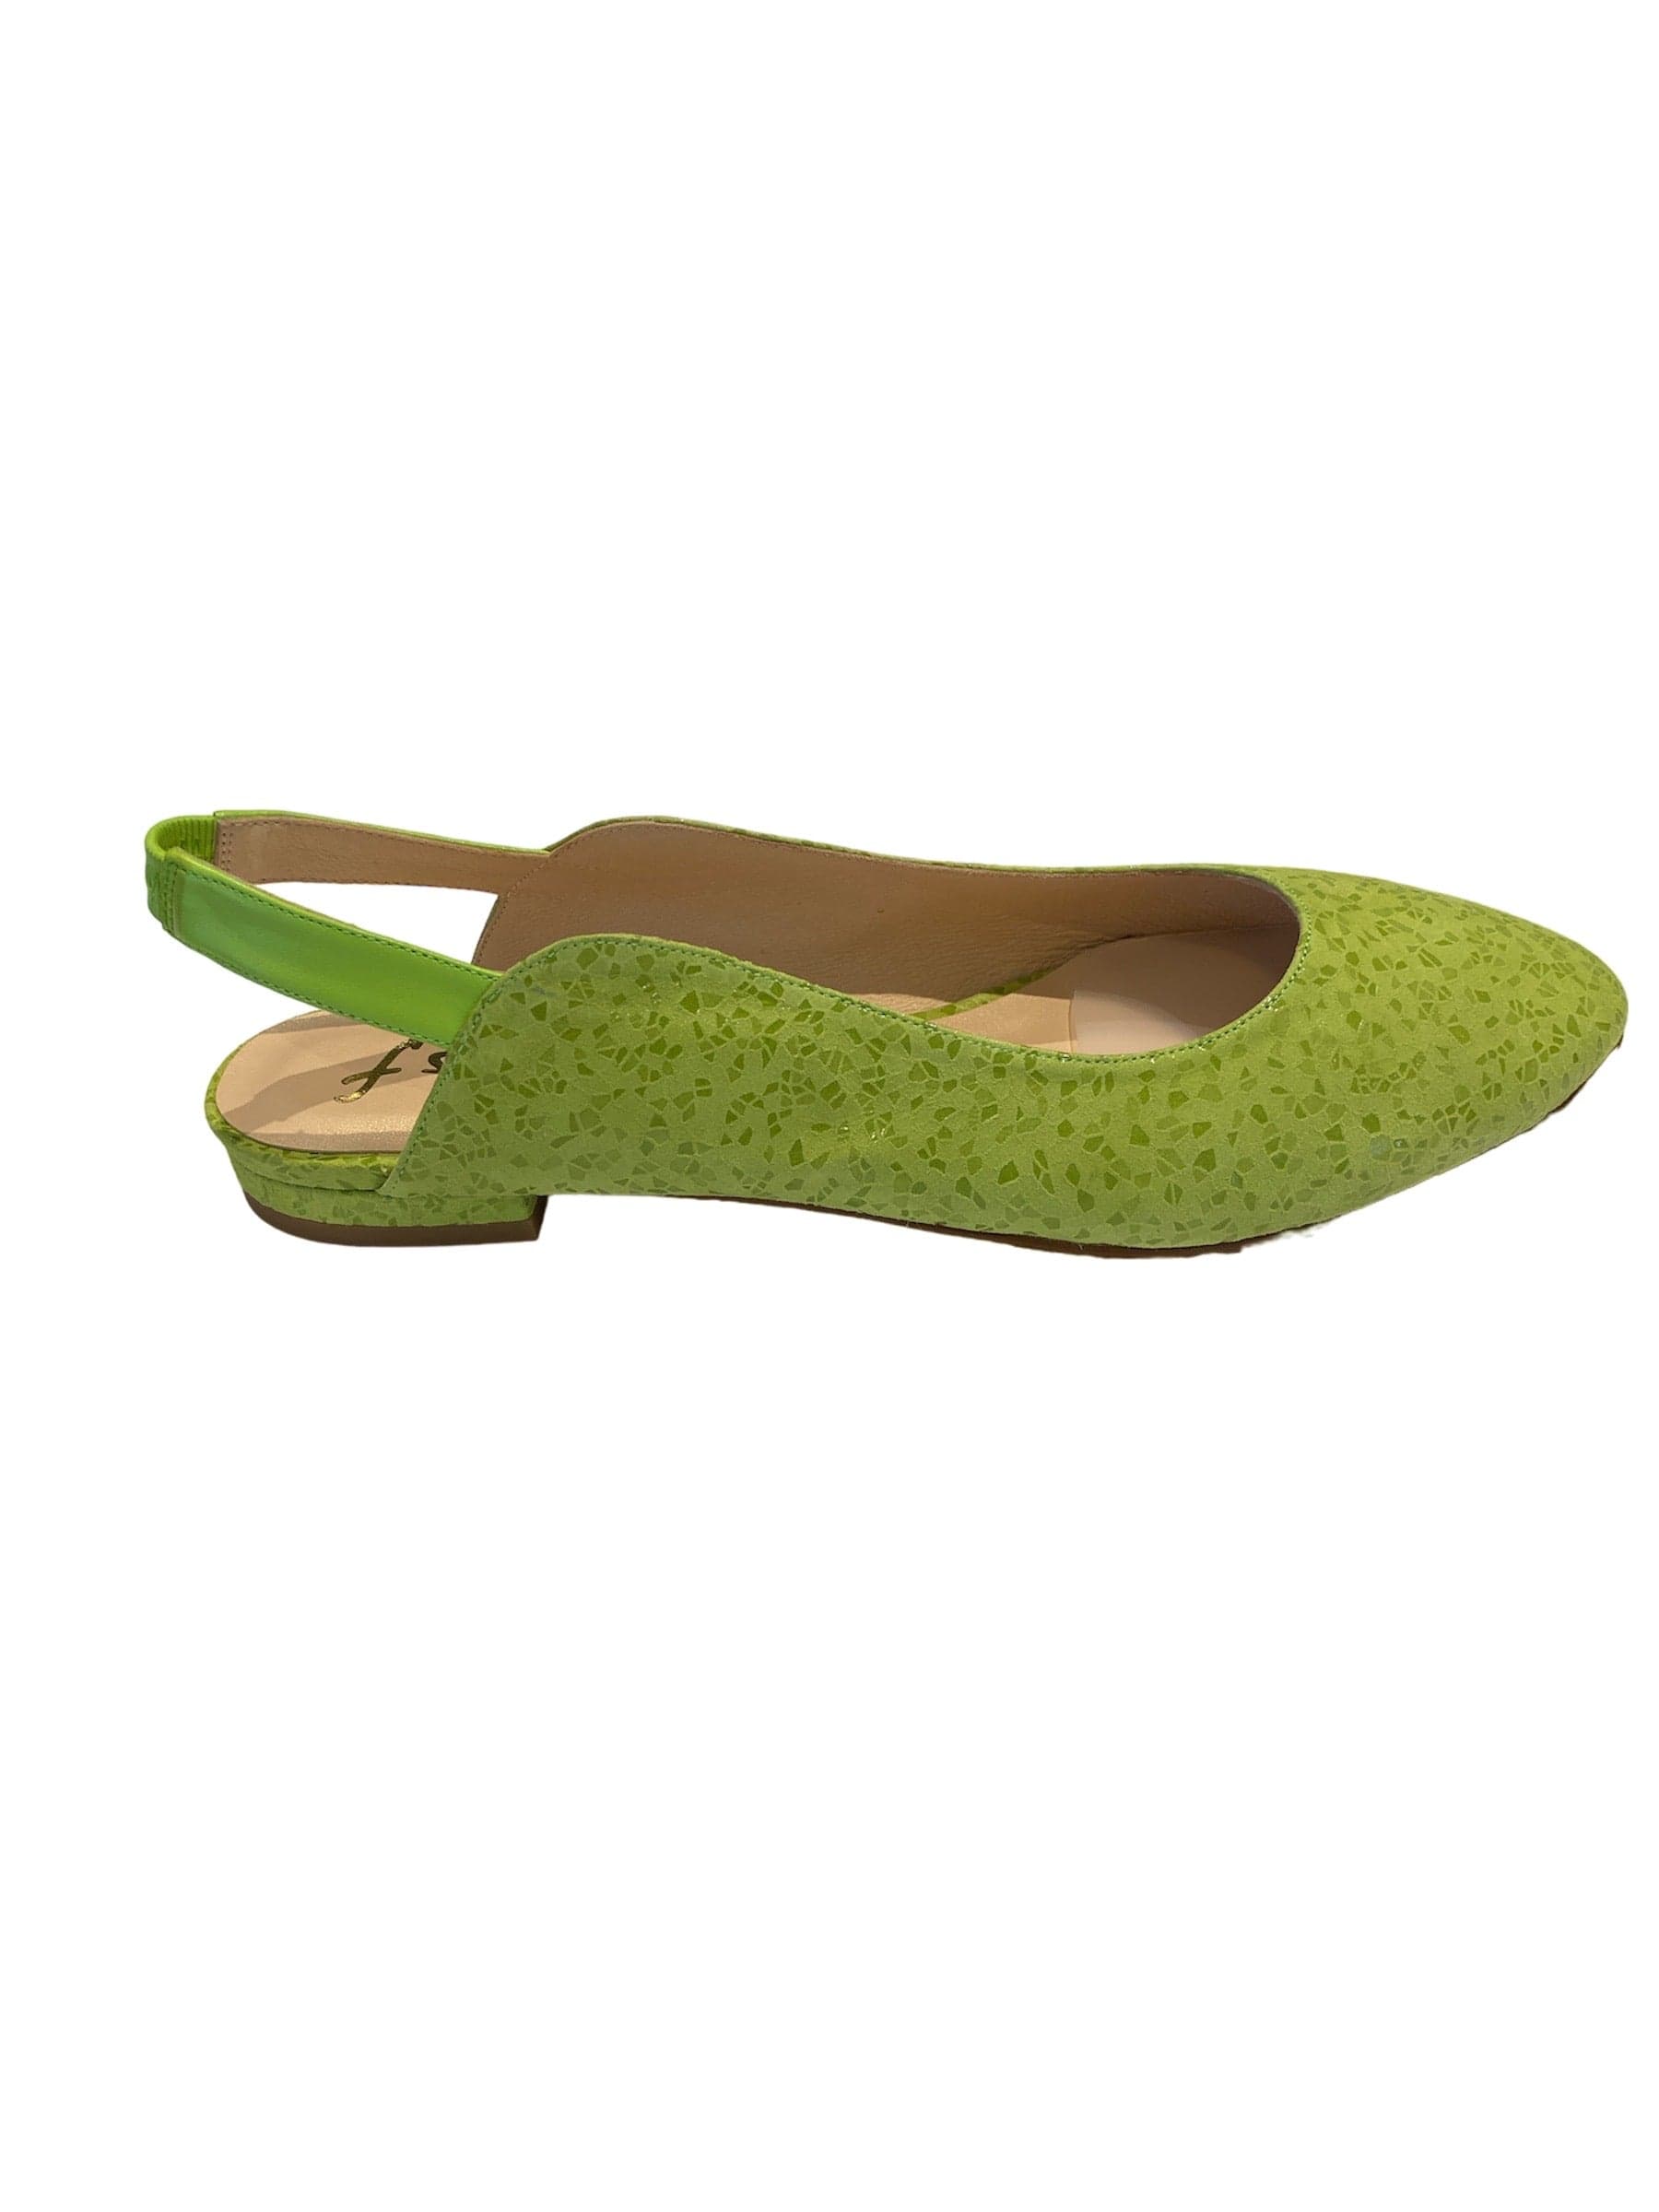 French Sole Women's Shoes Lime / 6.5 French Sole Lola